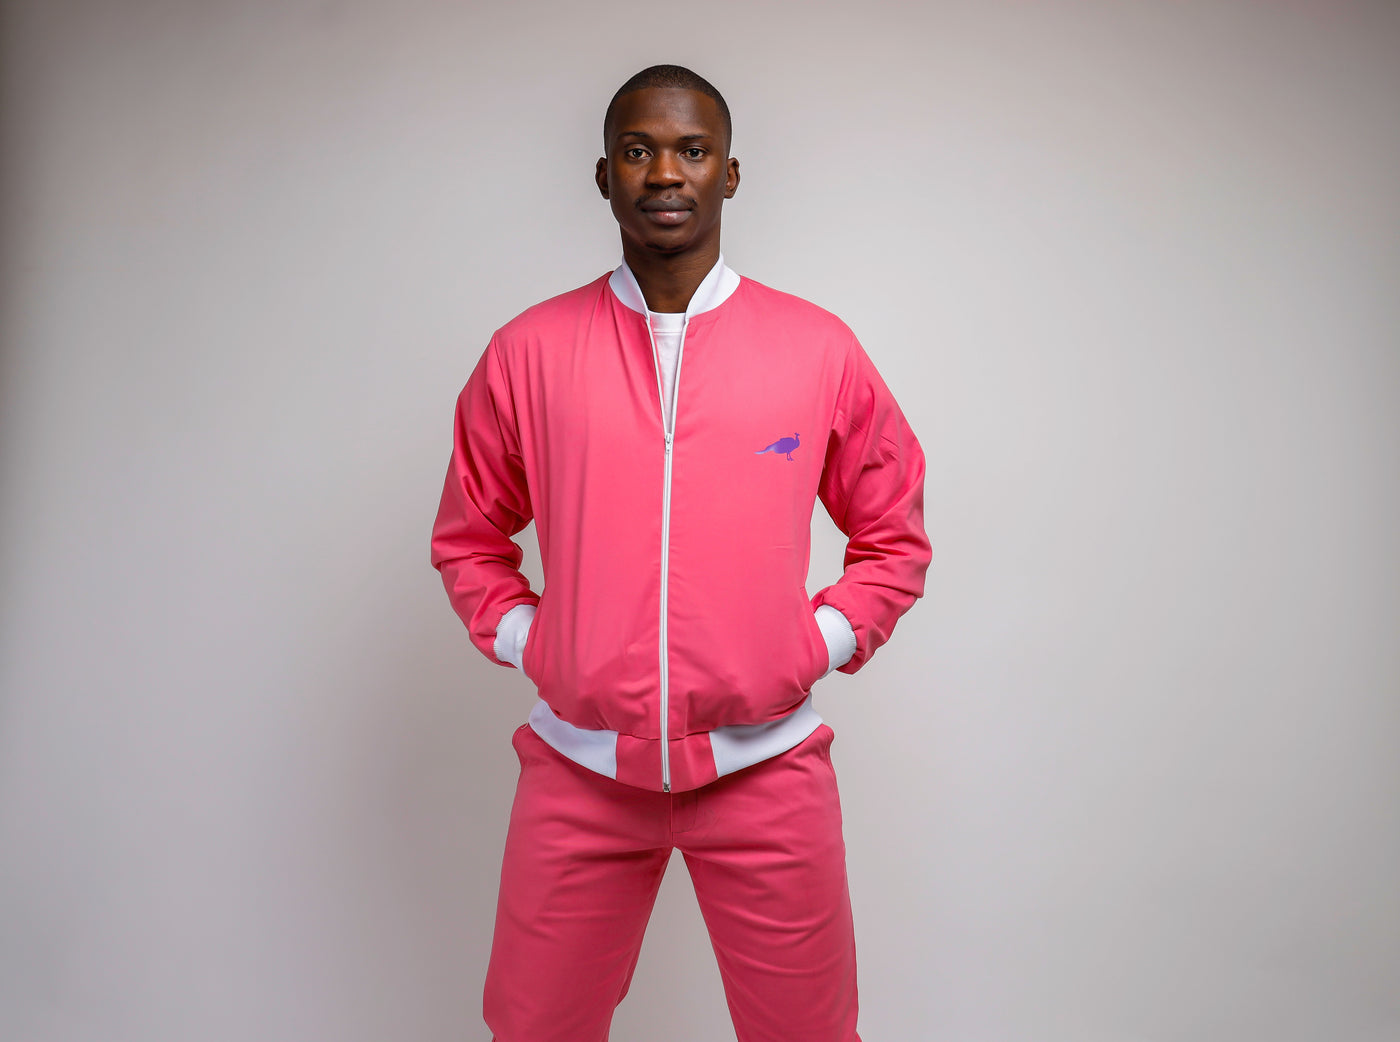 Hot Pink Bomber suit - GENTEEL - Image Is Half The Story Told